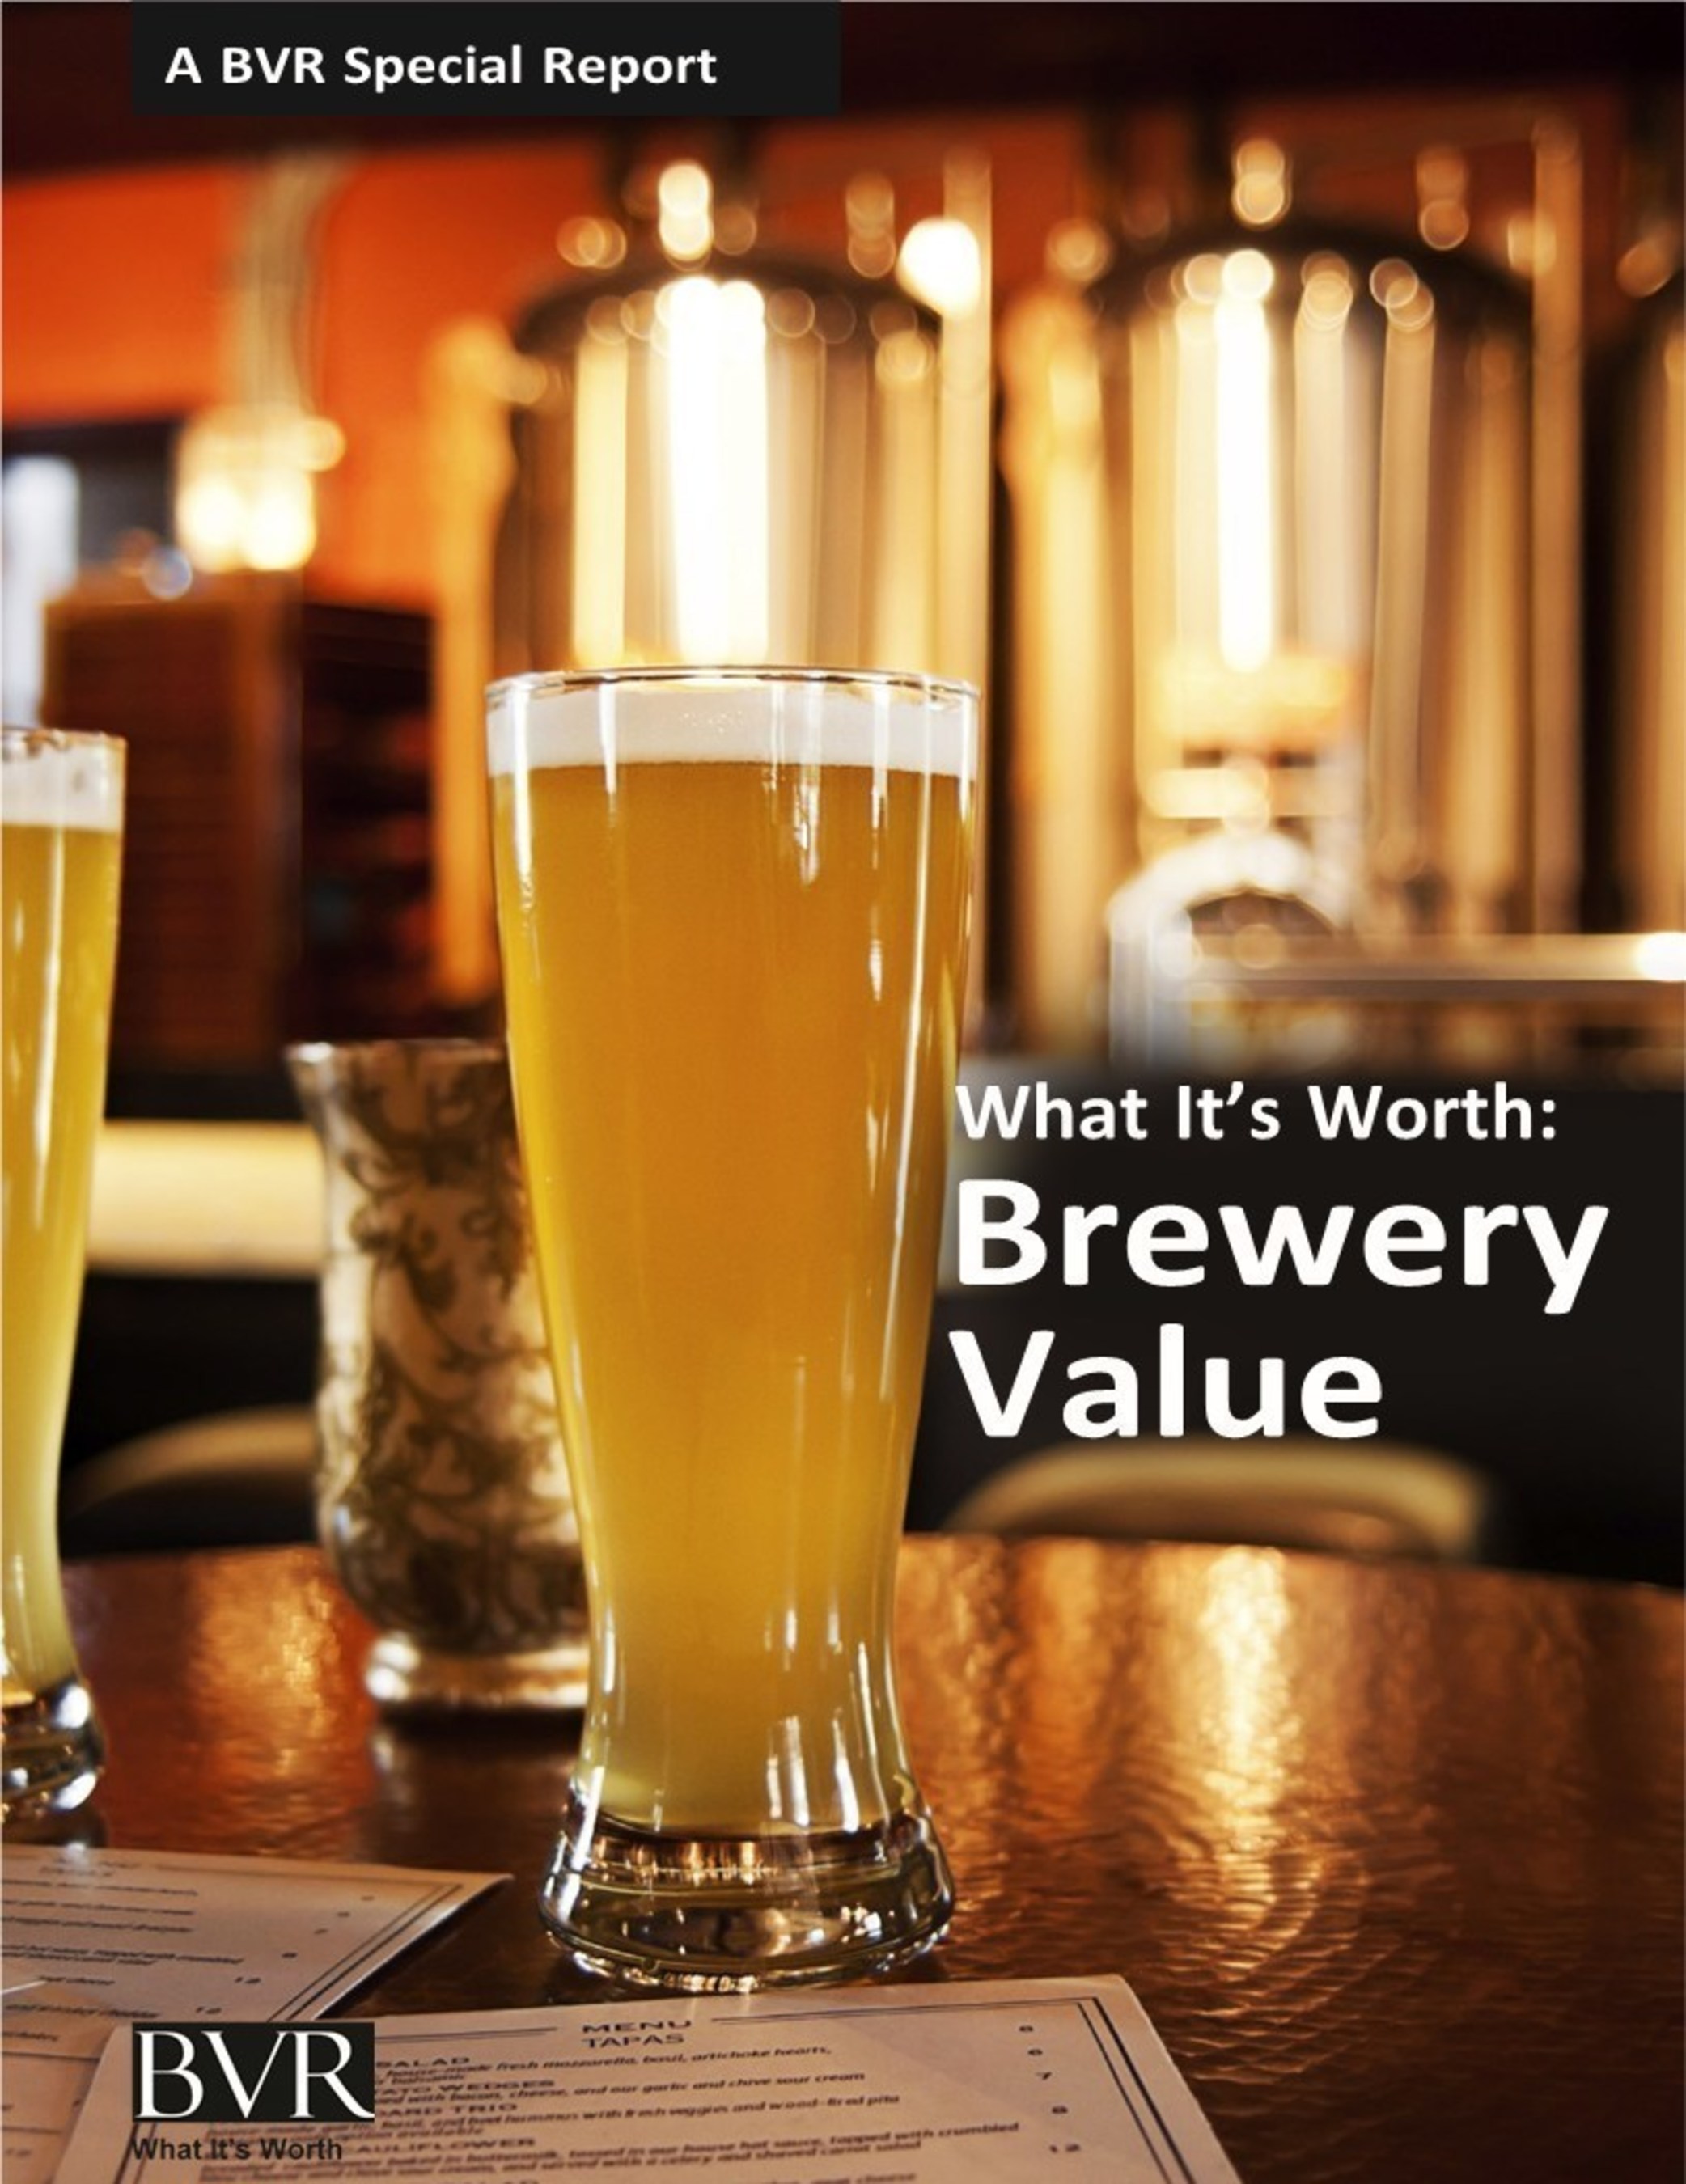 New special report: What It's Worth: Brewery Value